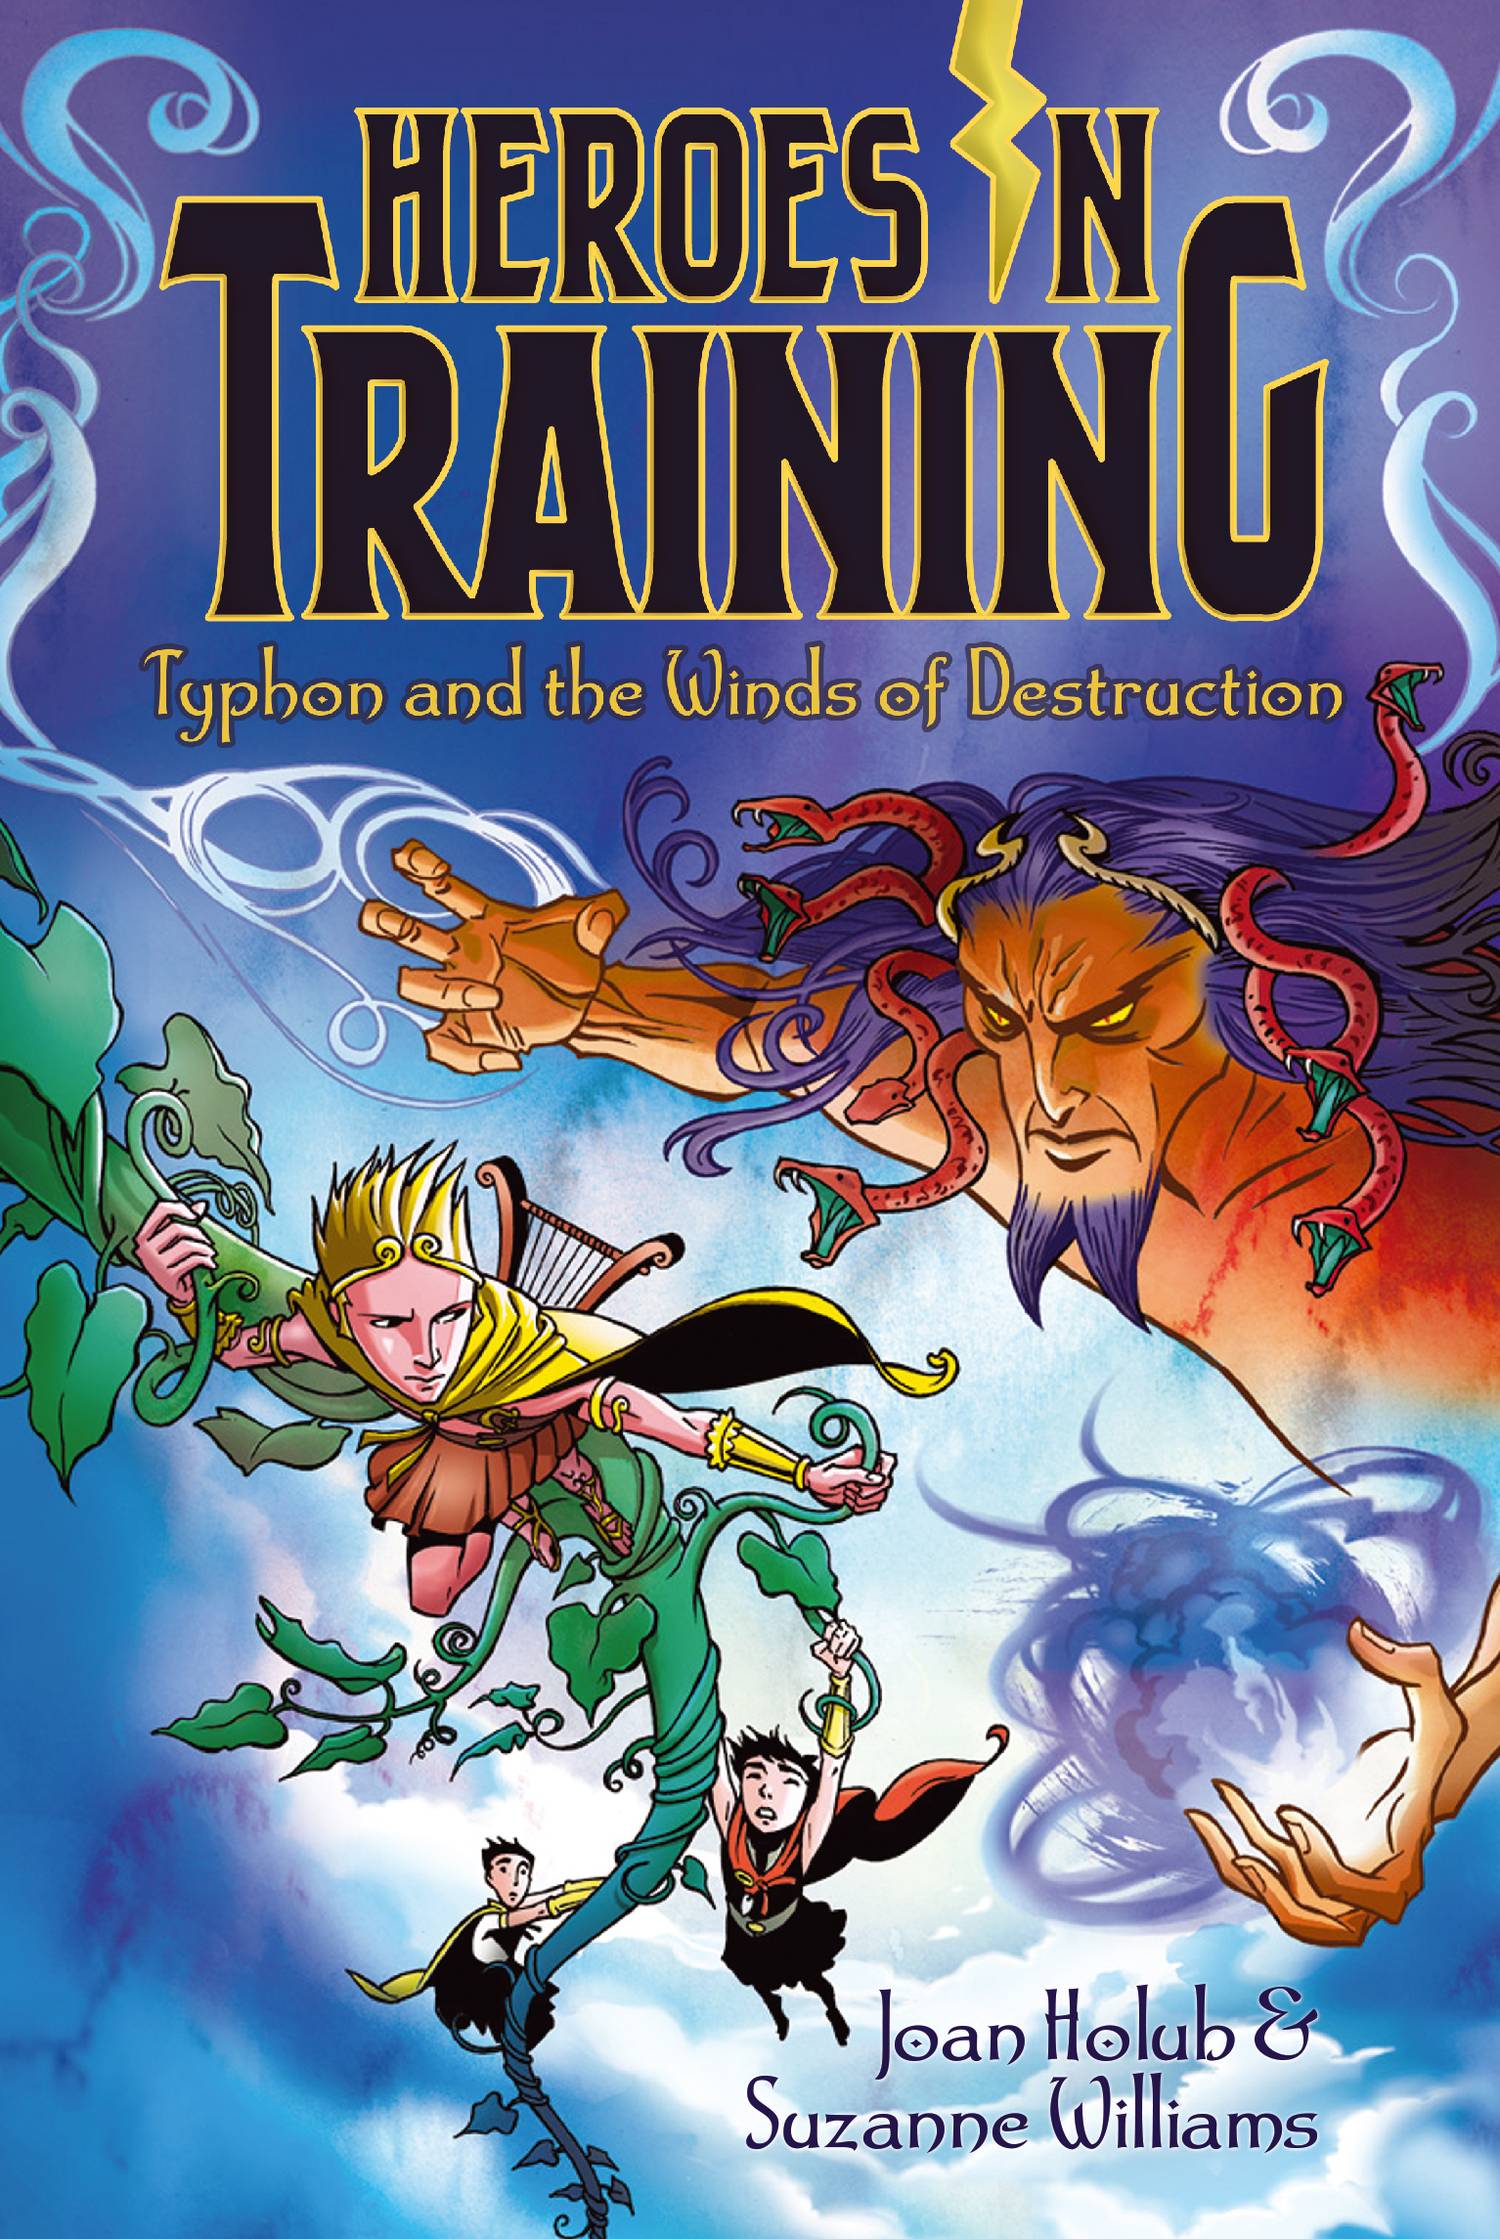 IMG : Heroes in Training Typhon and the Winds of destruction#5